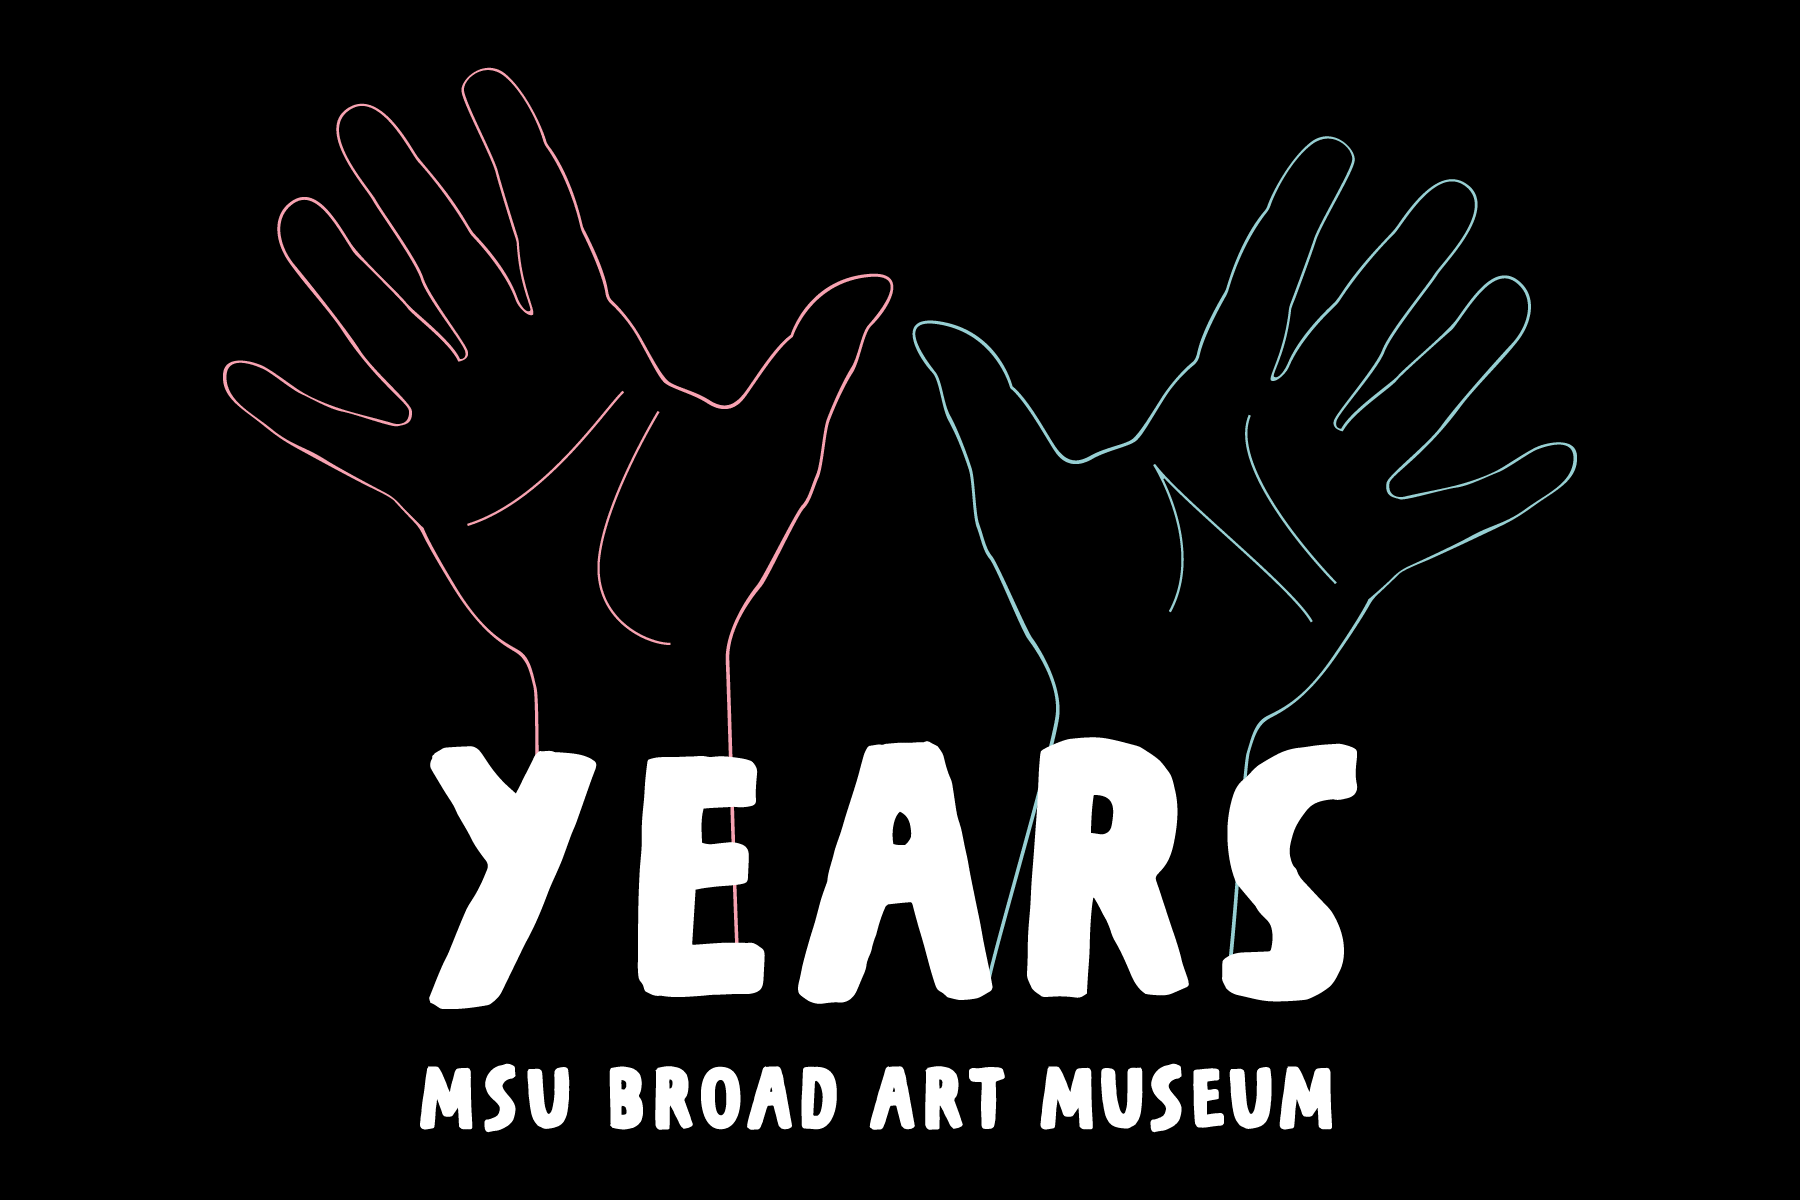 An illustration of hands holding up all ten fingers and text reading "10 Years, MSU Broad Art Museum"